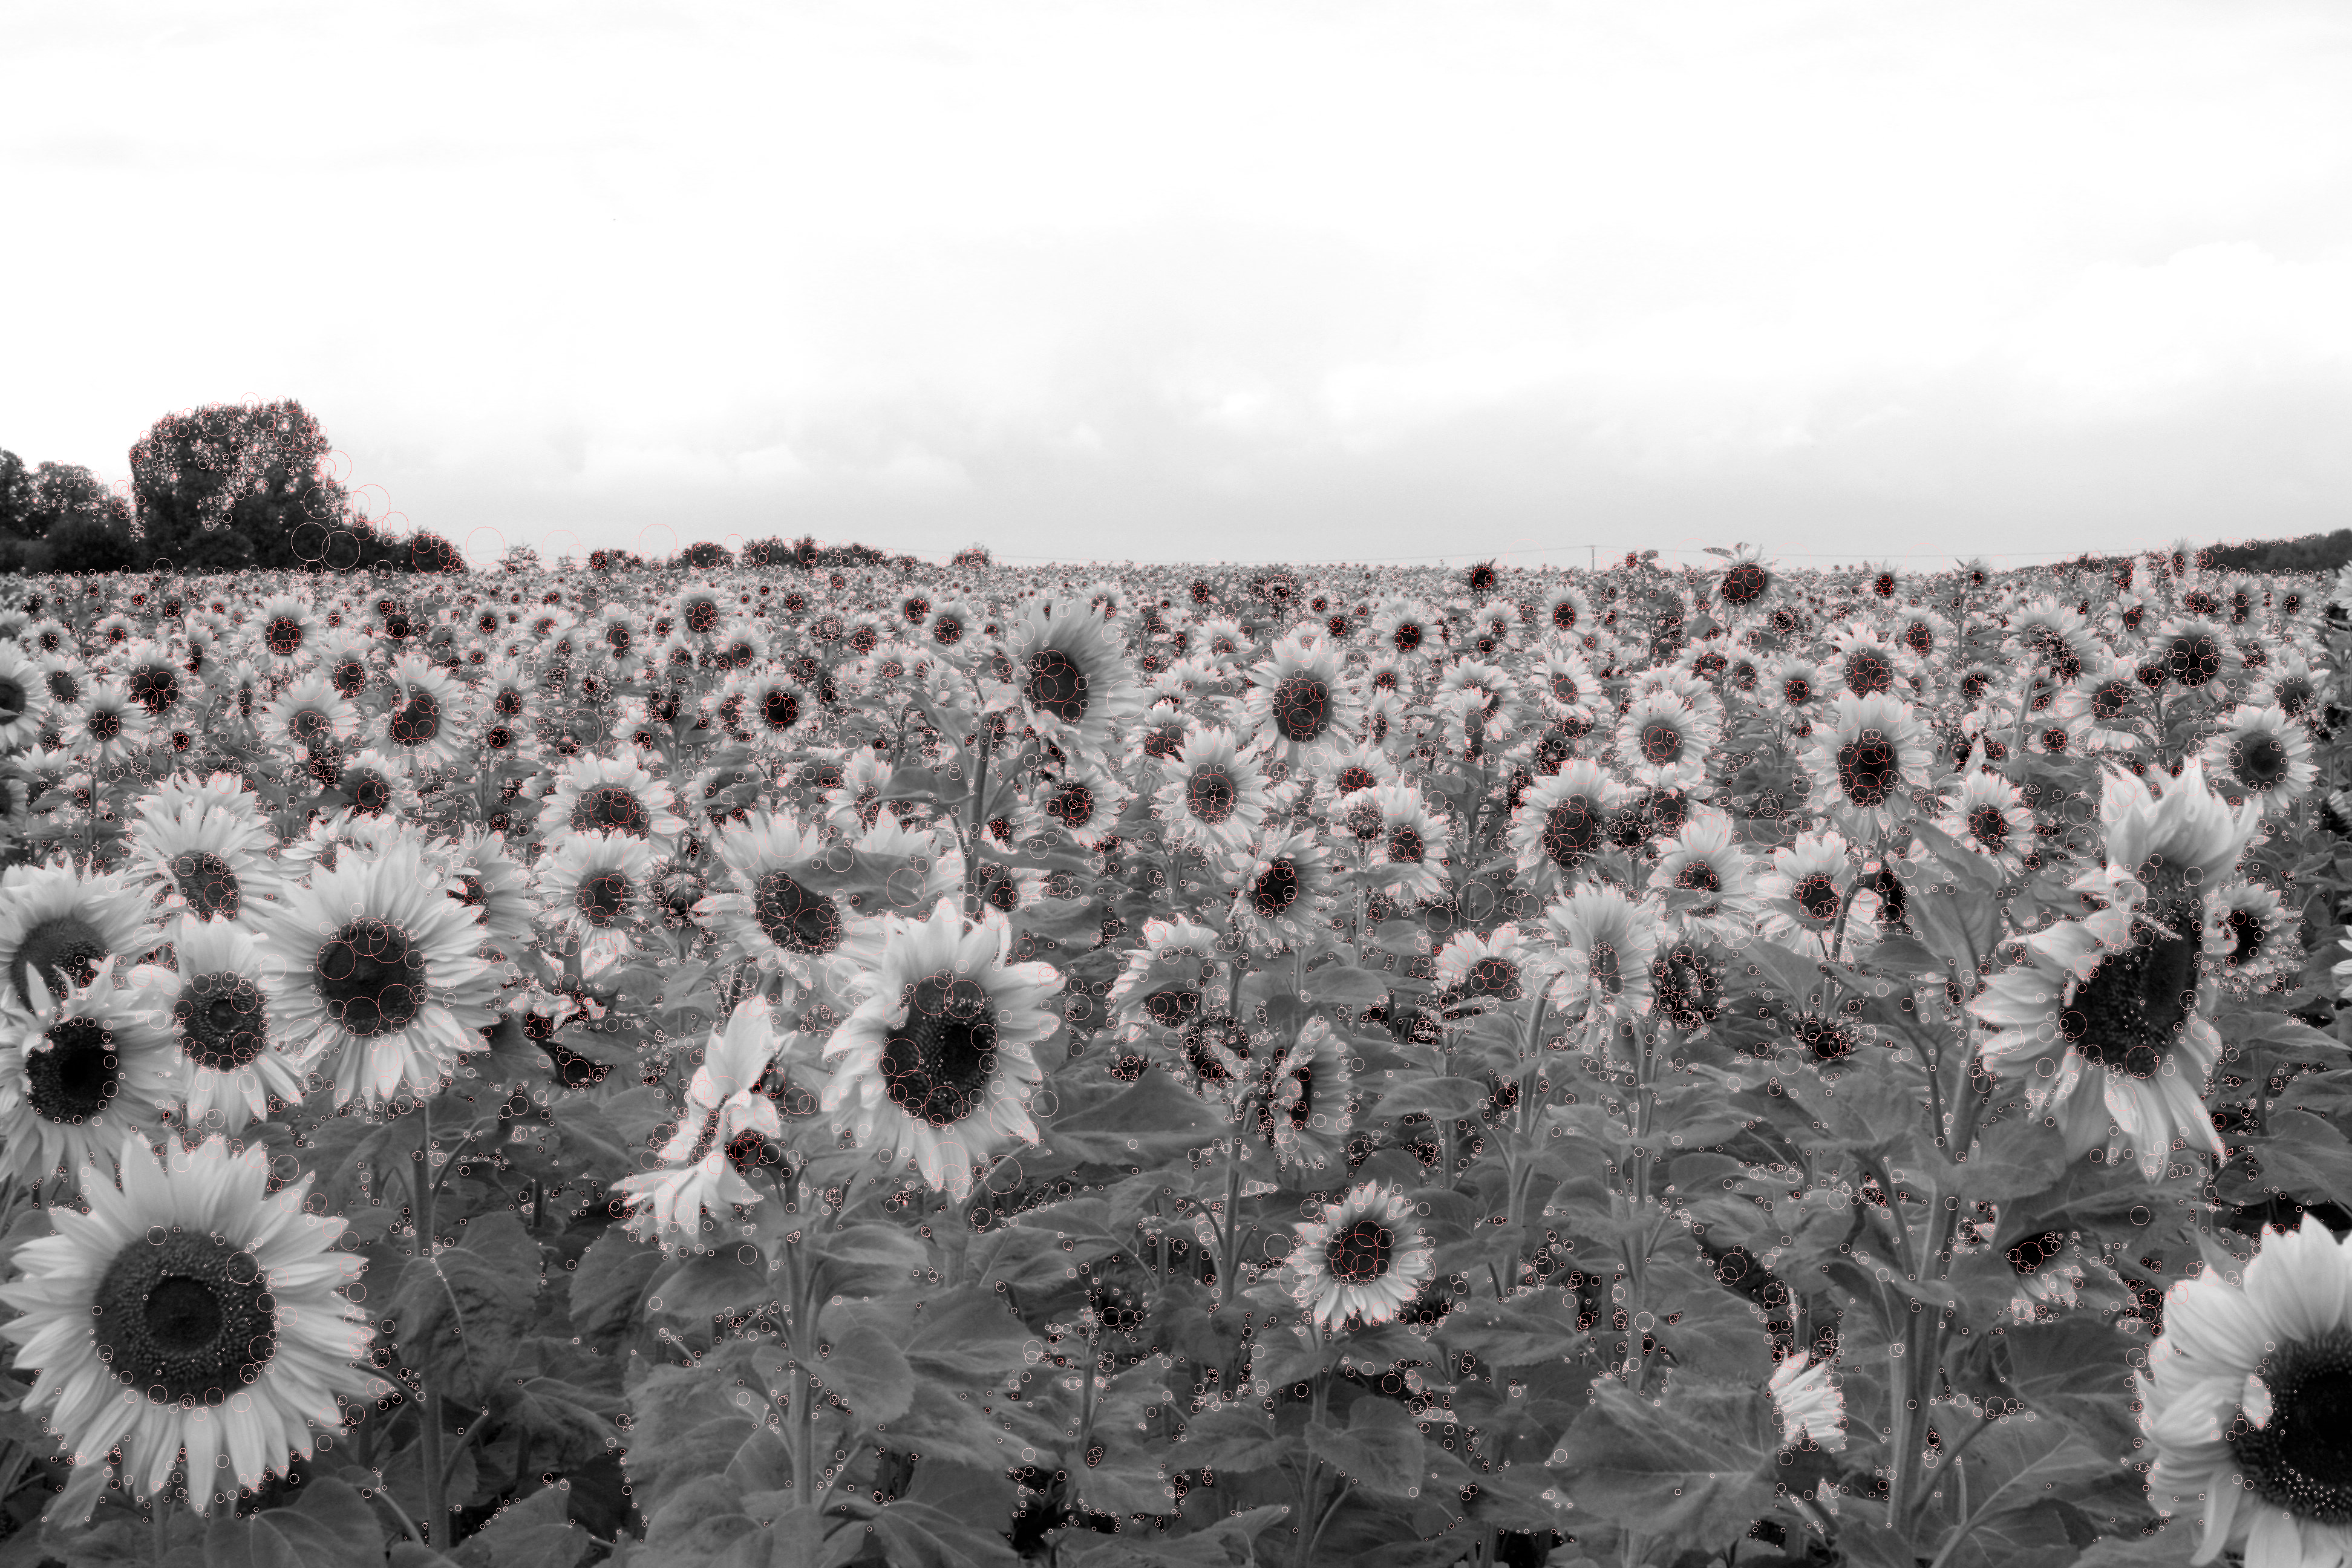 17180 detected blobs in an image showing sunflowers